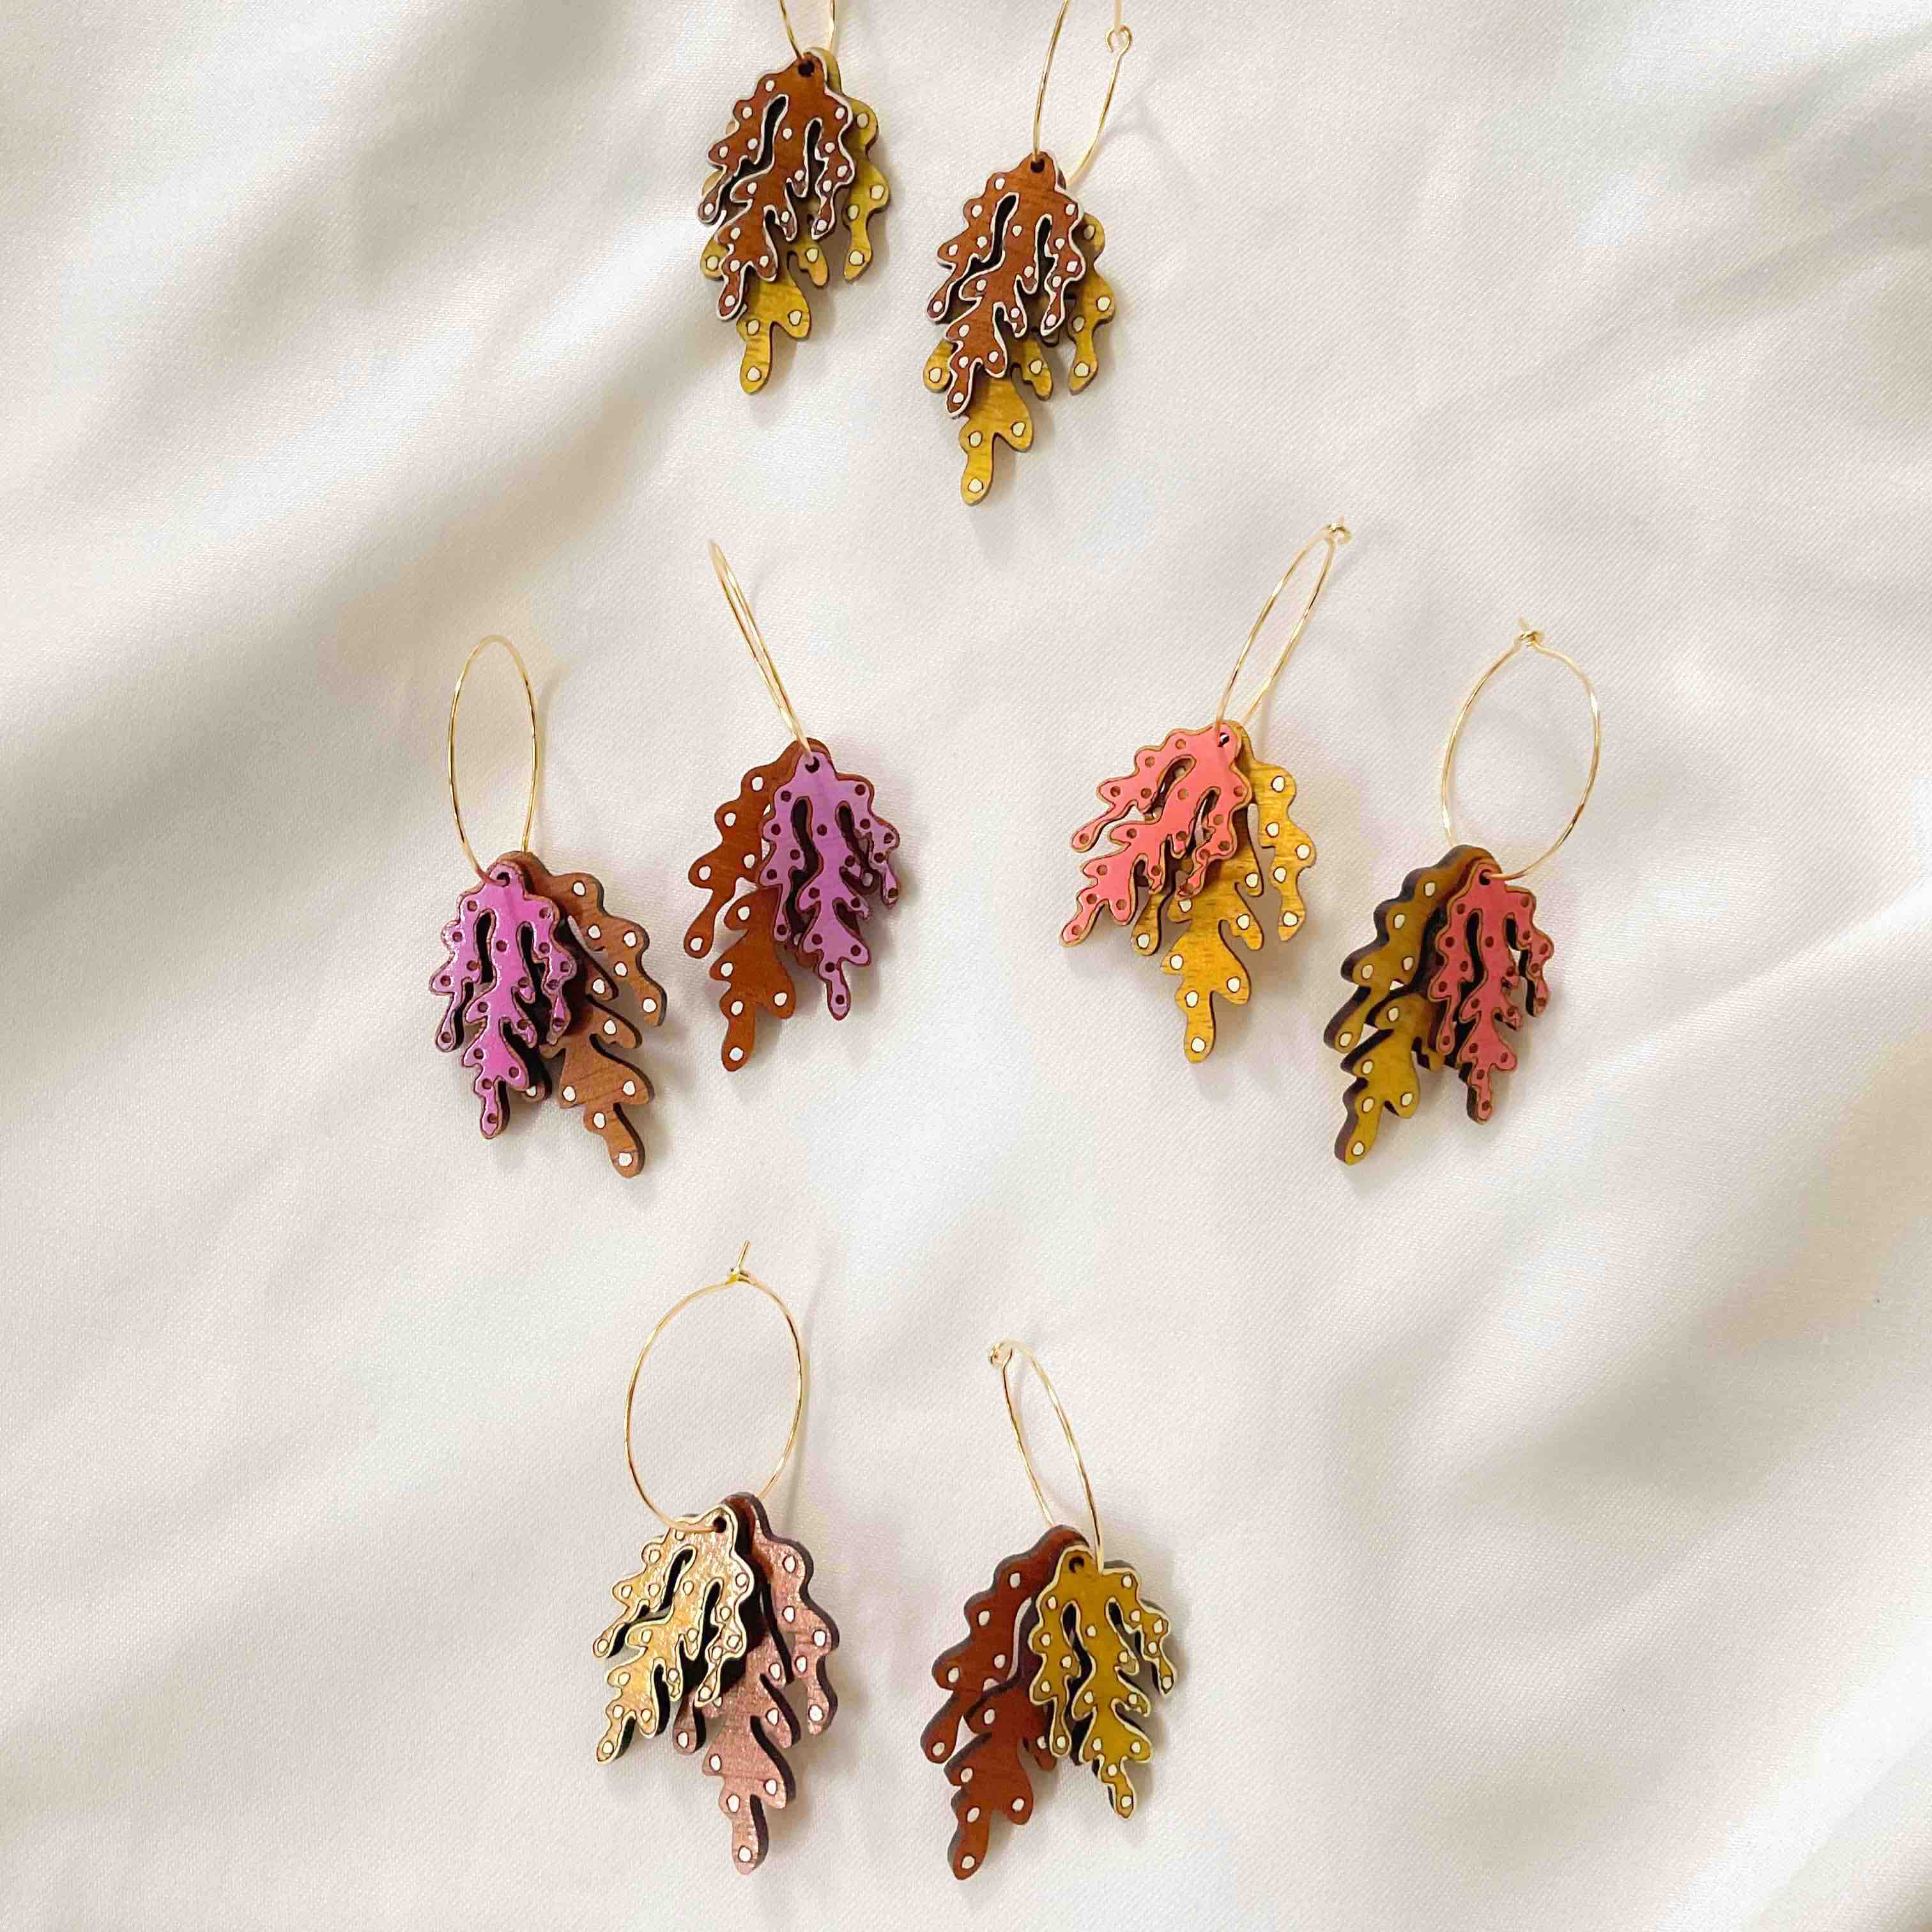 Coral Eco-friendly Recycled Wood & Gold Earrings